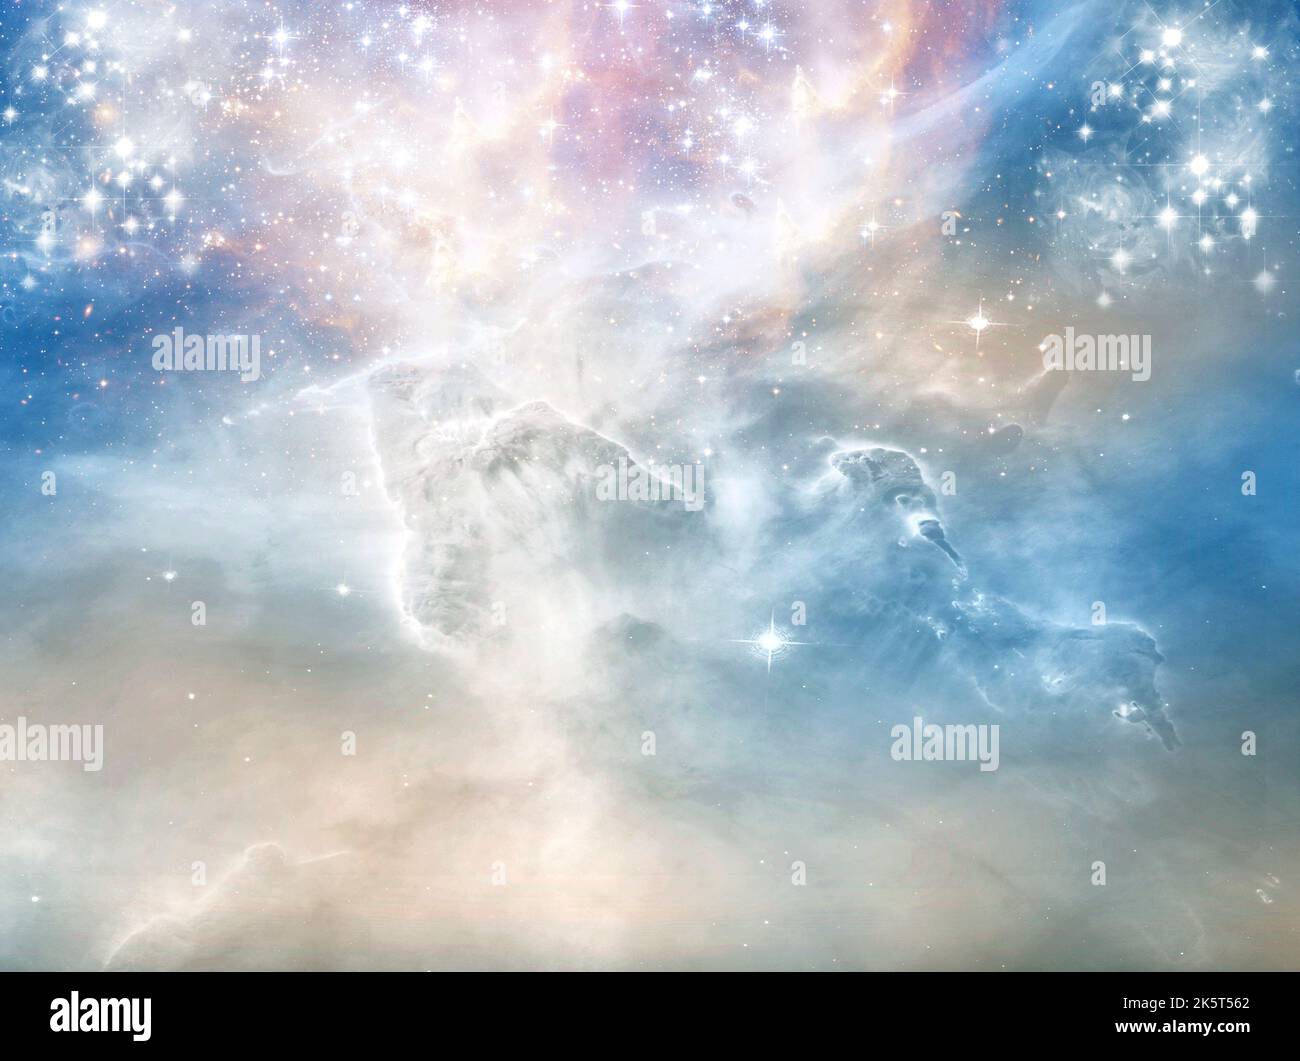 abstract angelic mystic mystical magic magical religious spiritual blue and gray  background with stars and cloudy sky Stock Photo